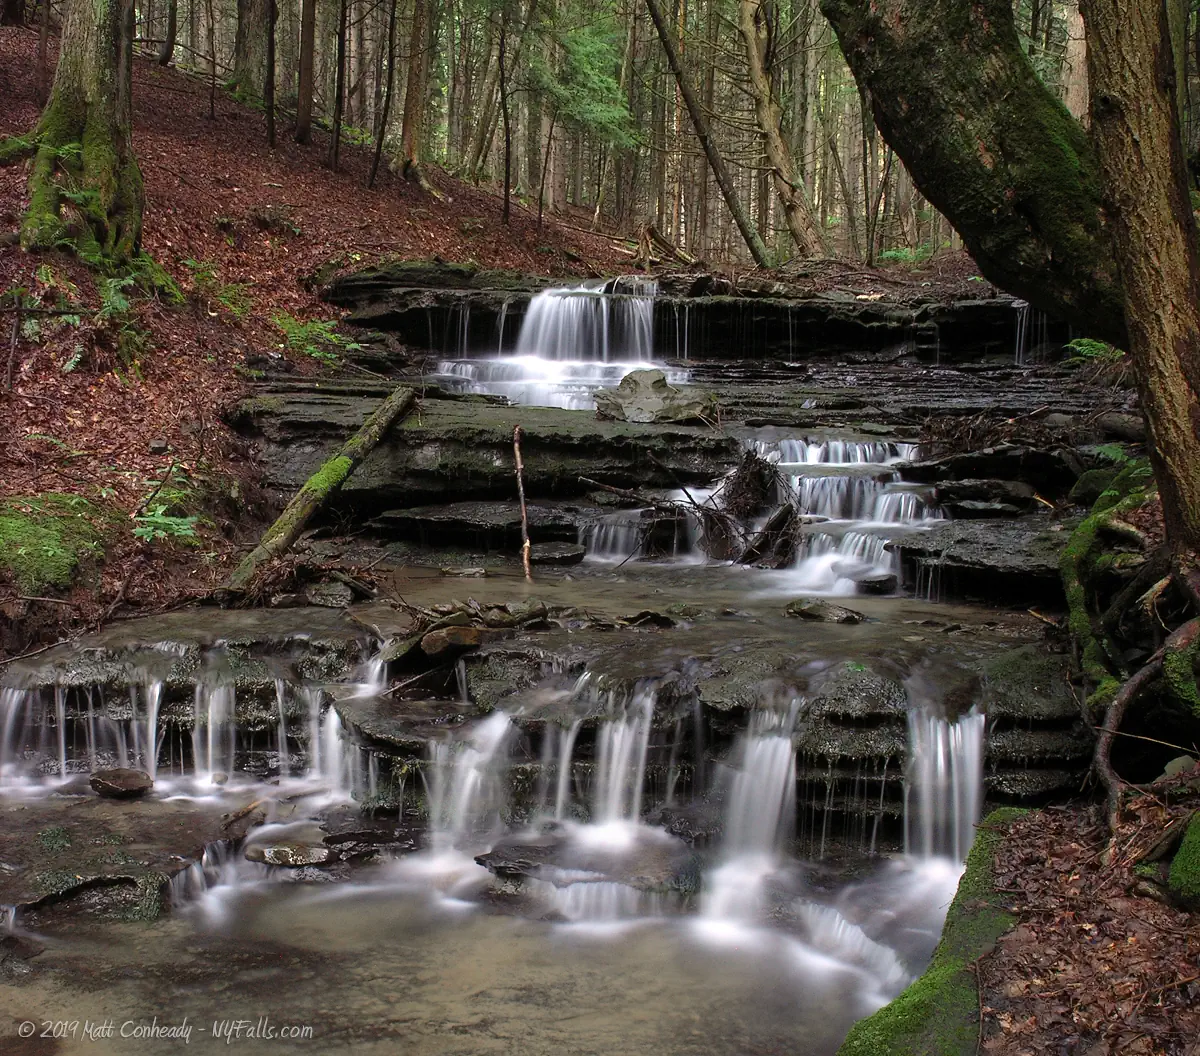 A view of Enchanted Hollow Falls in low flow